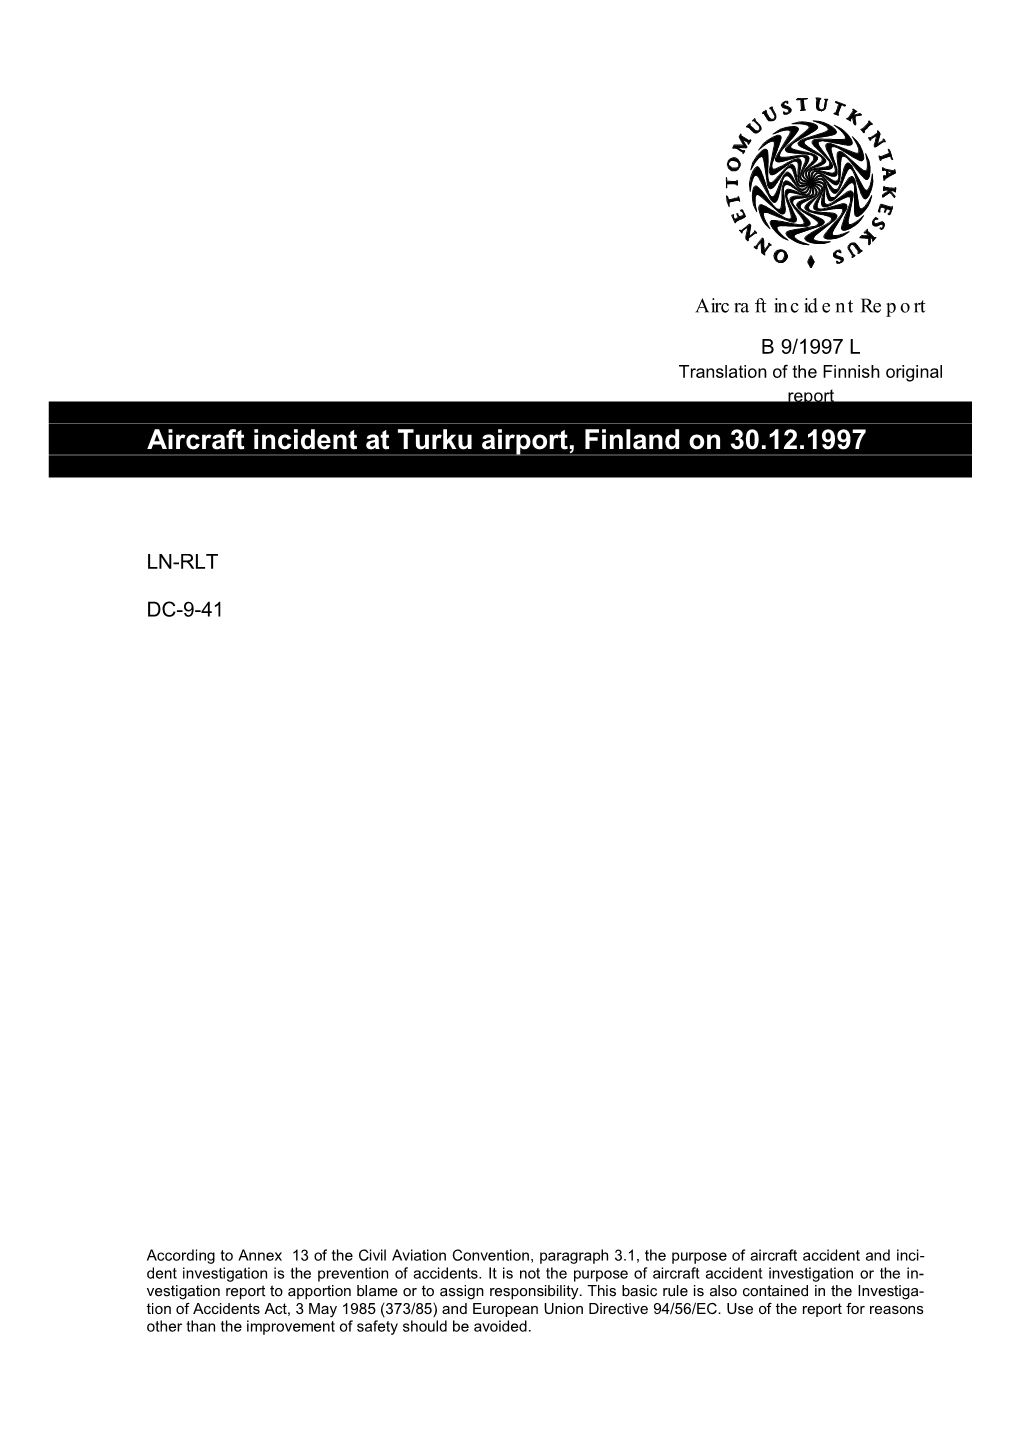 Aircraft Incident at Turku Airport, Finland on 30.12.1997